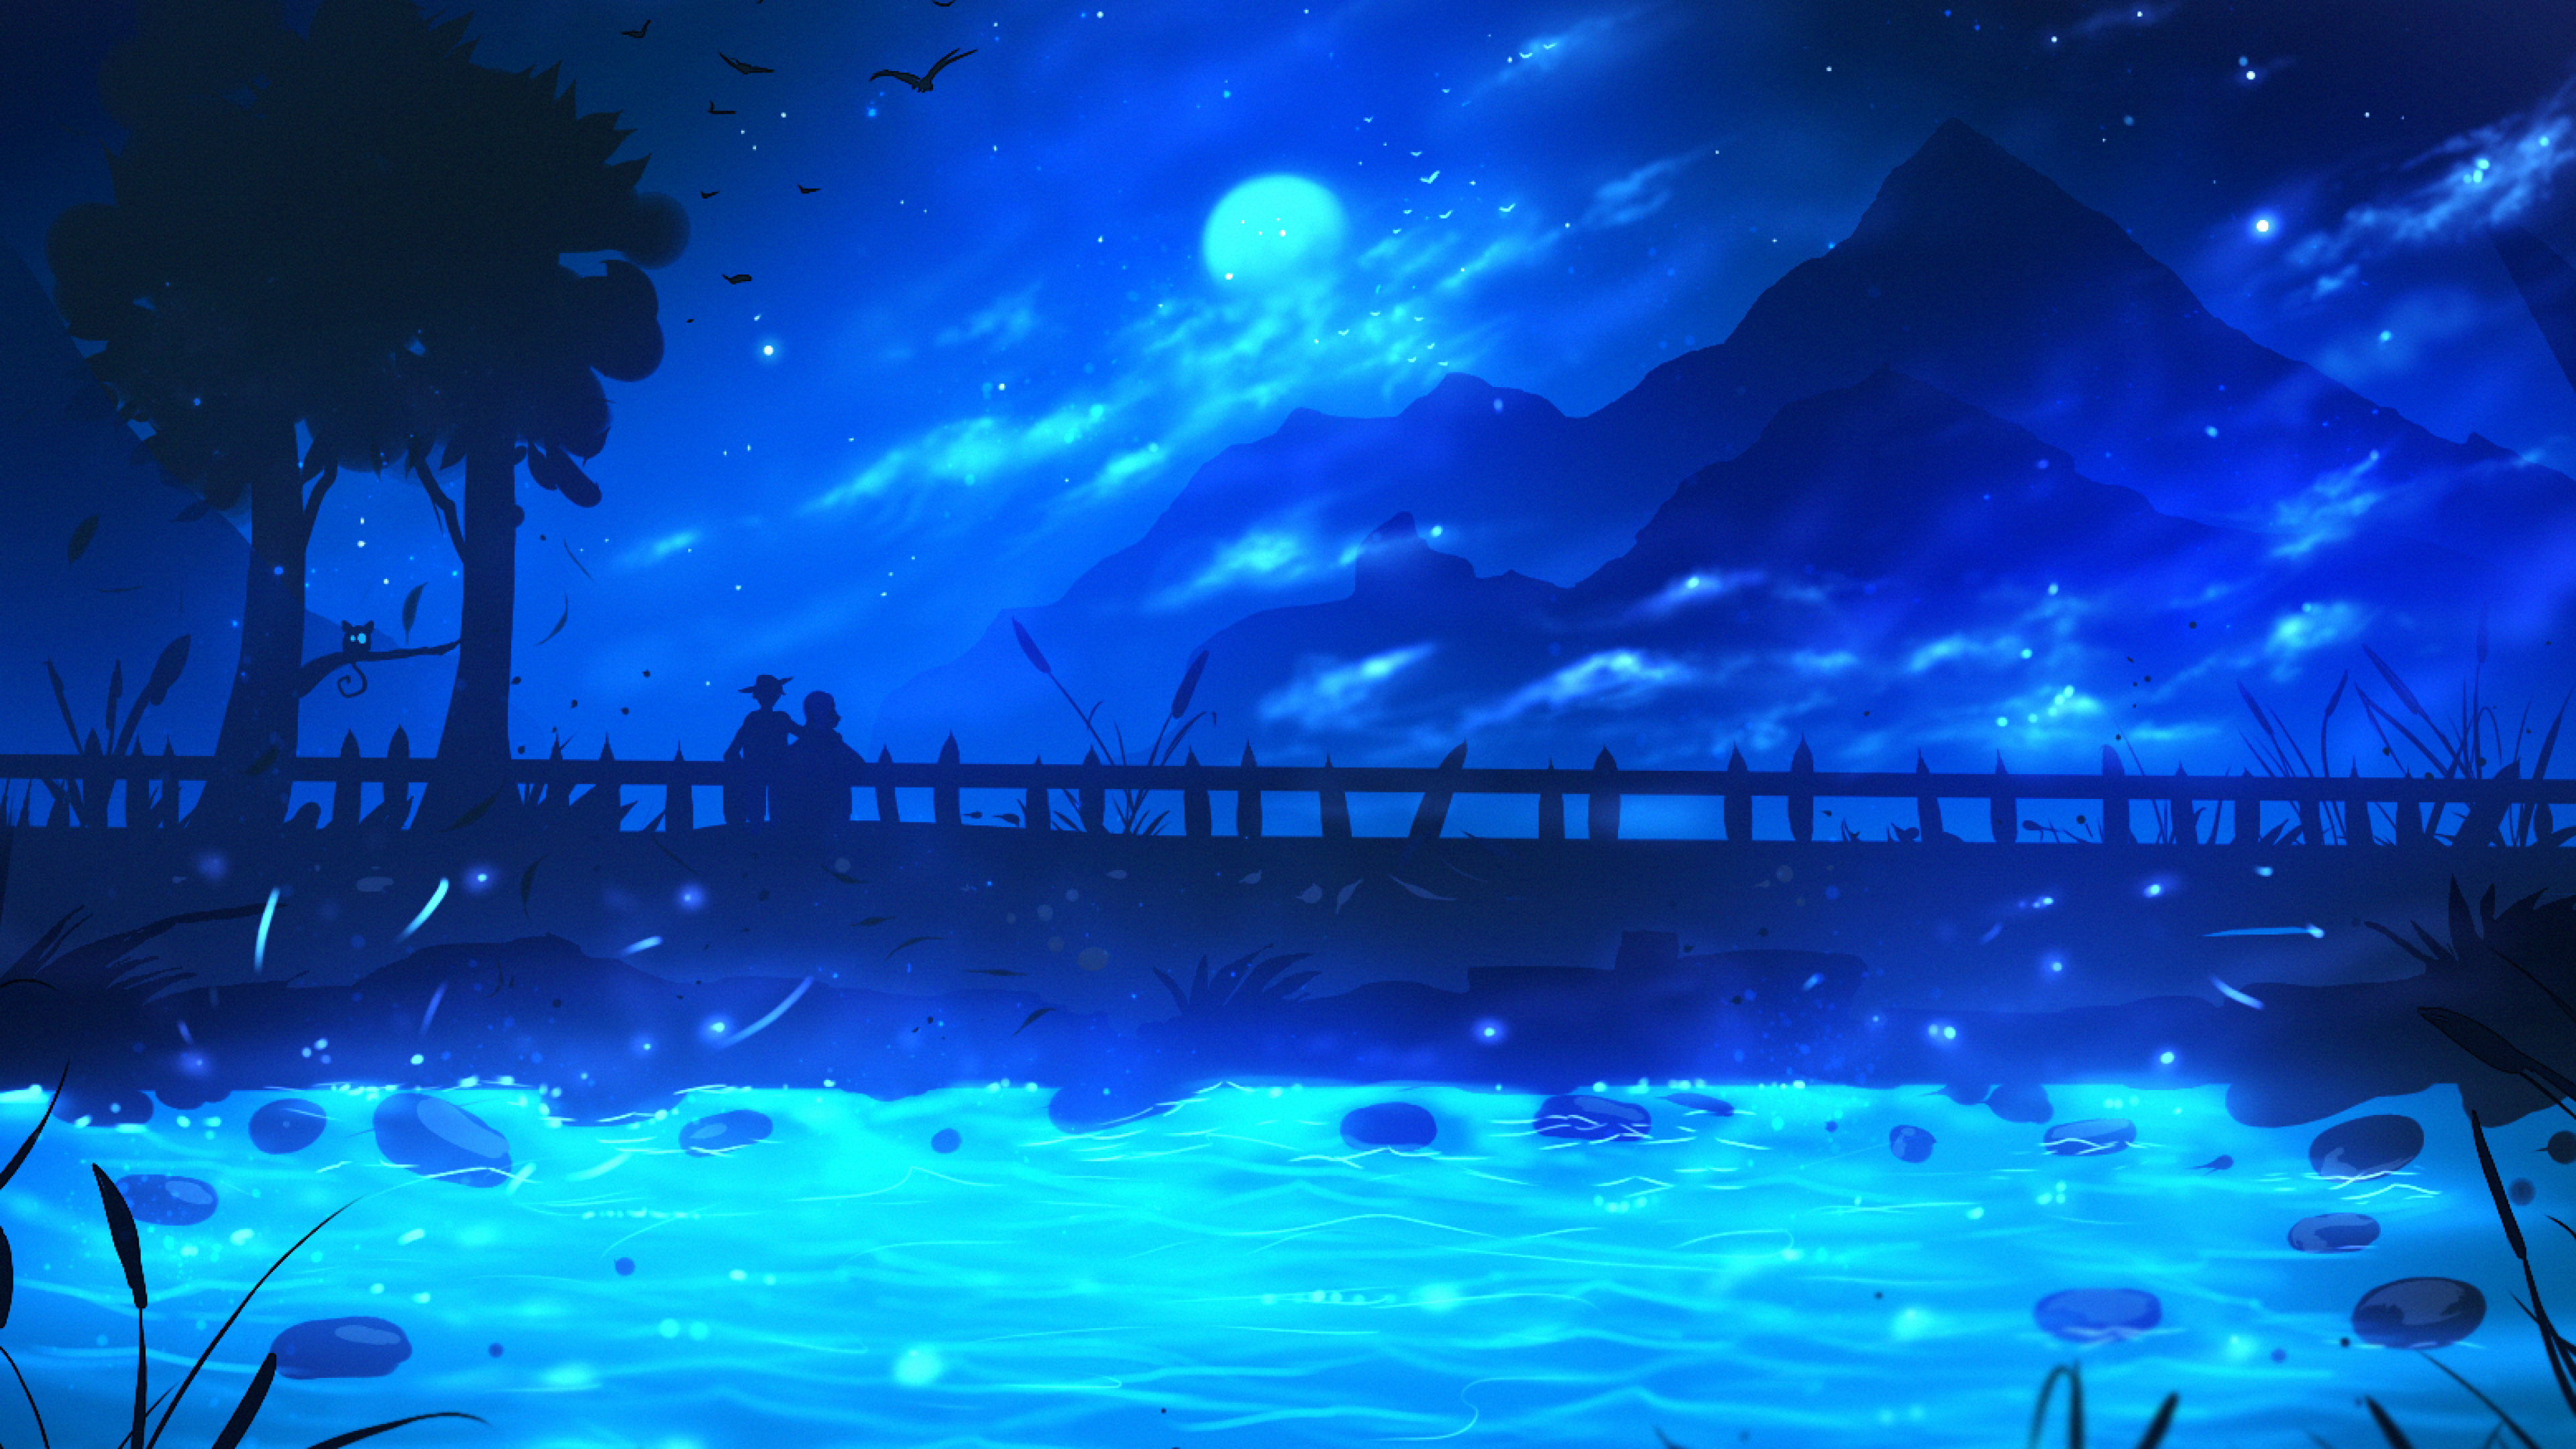 Download 3840x2160 Fantasy World, Blue Theme, River, Moon, Mountains, Landscape, Crows Wallpaper for UHD TV